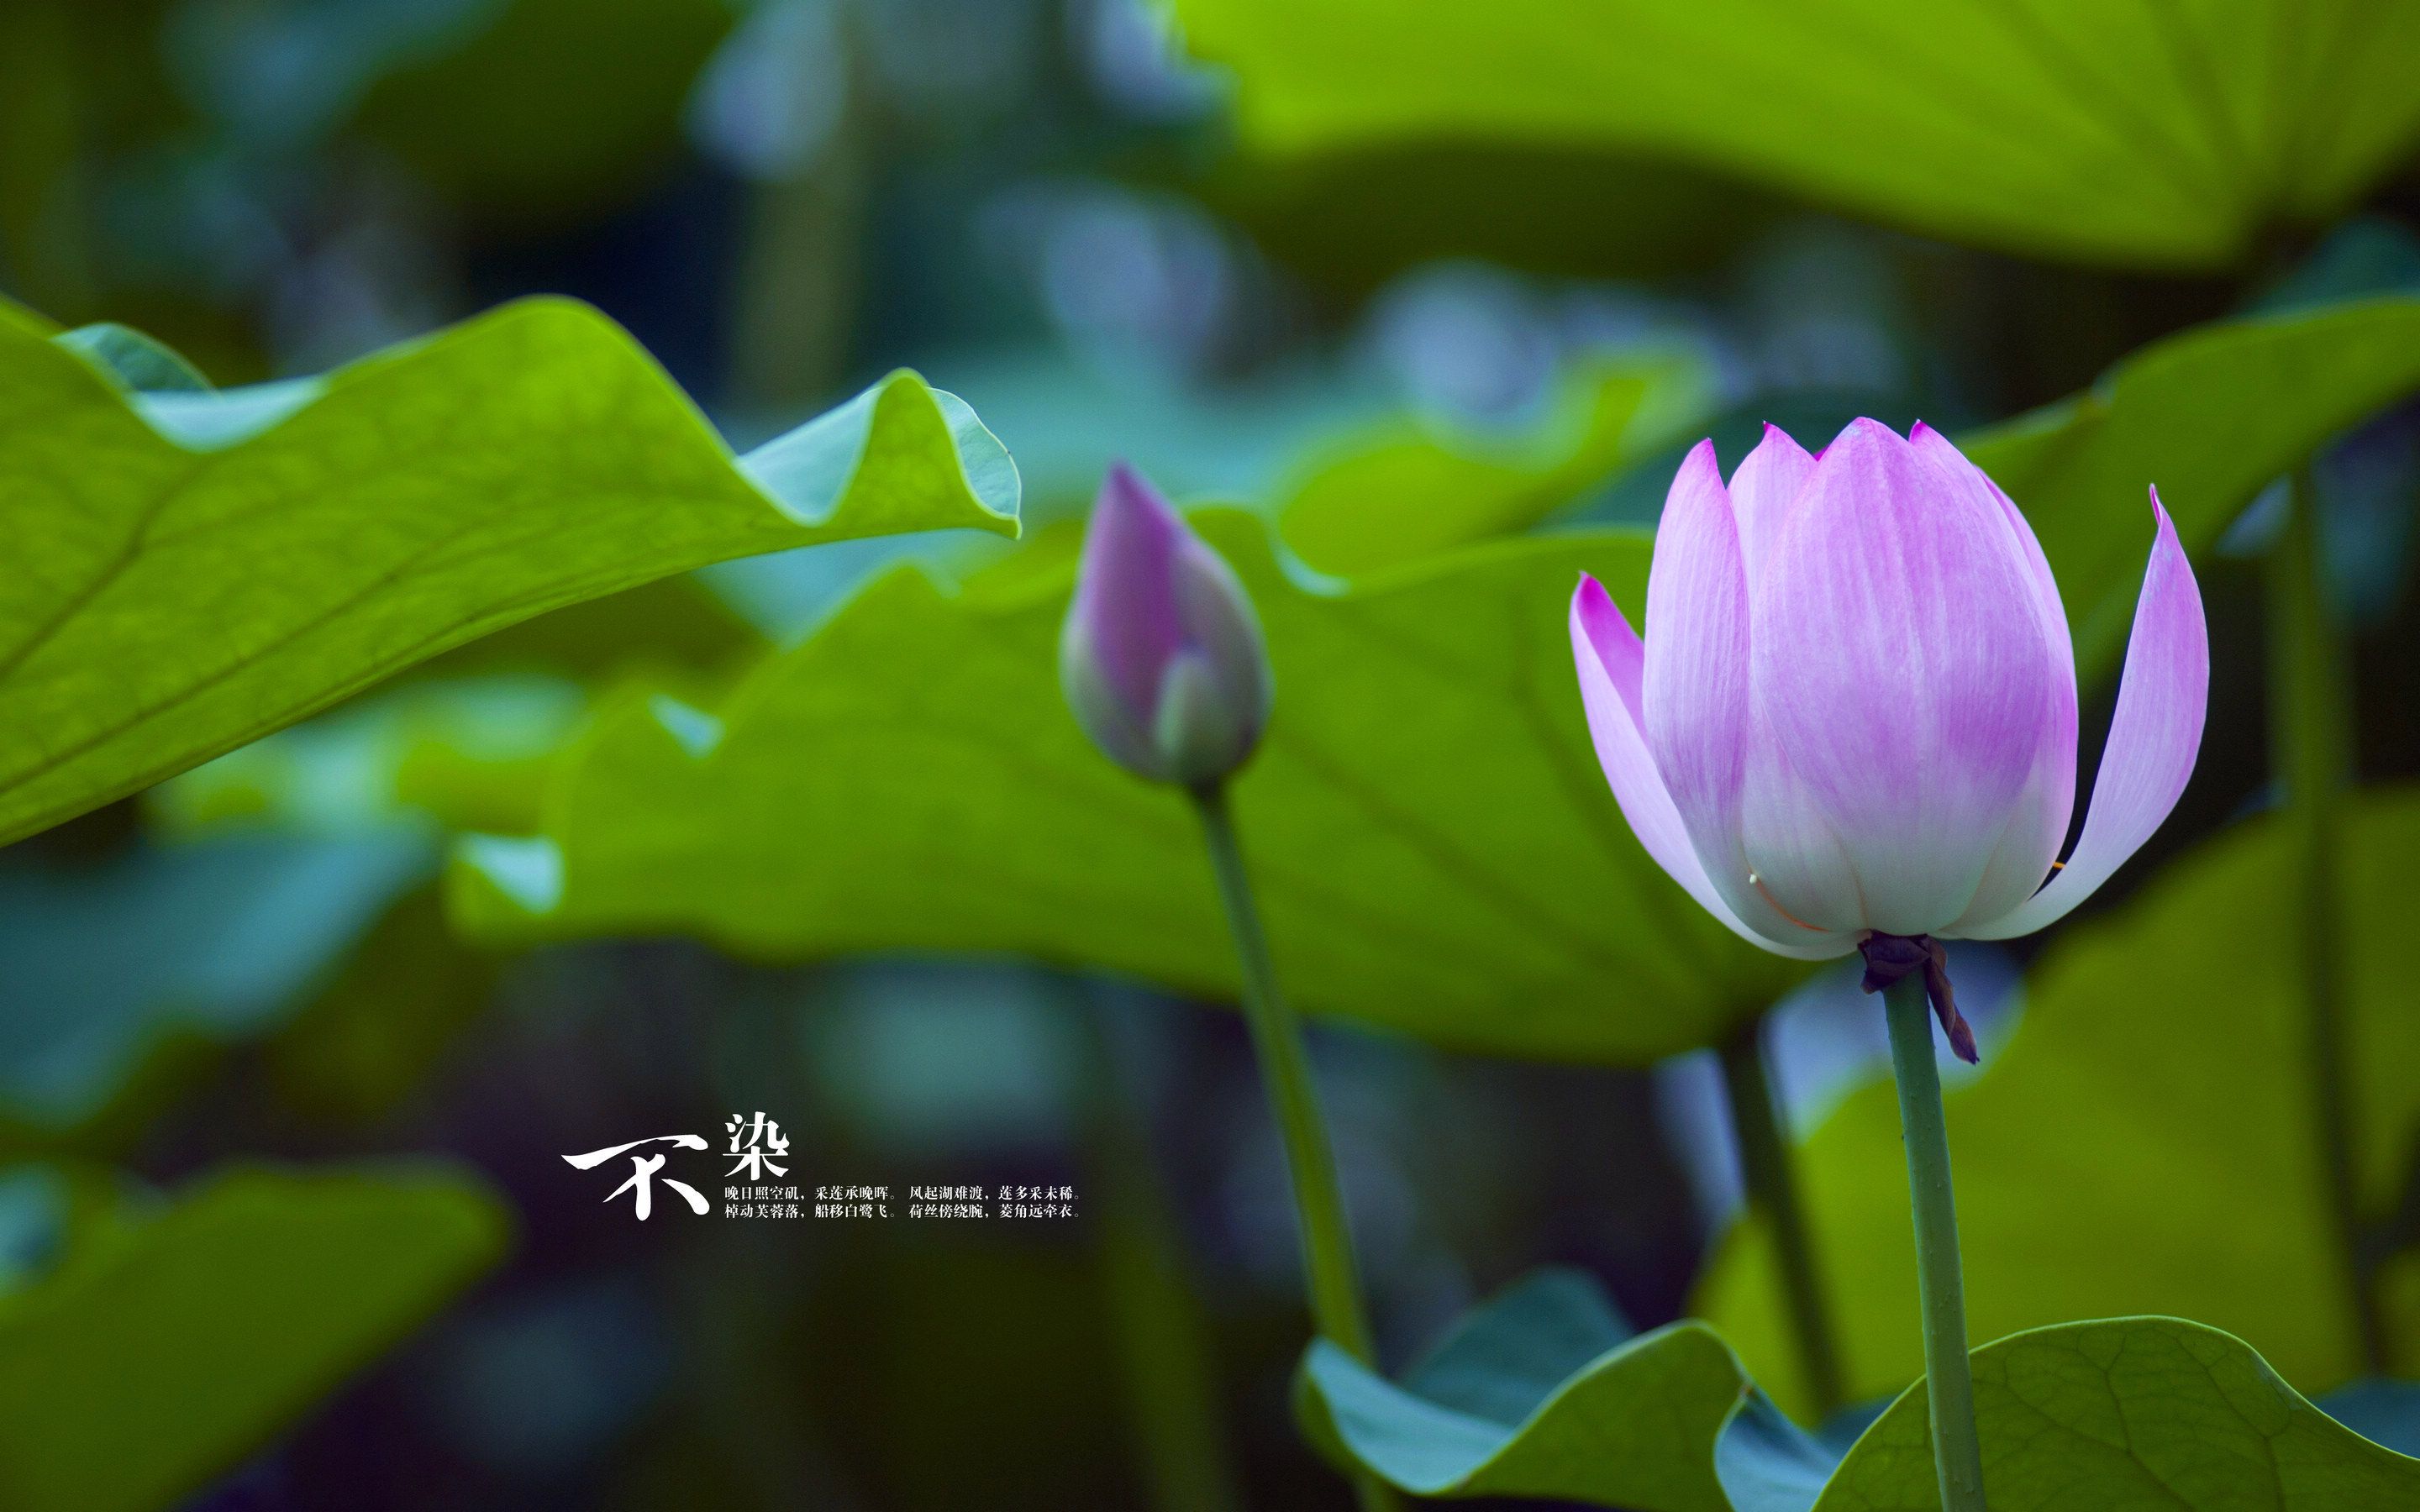 Lotus Windows 8 Theme and Background All for Windows 10 Free